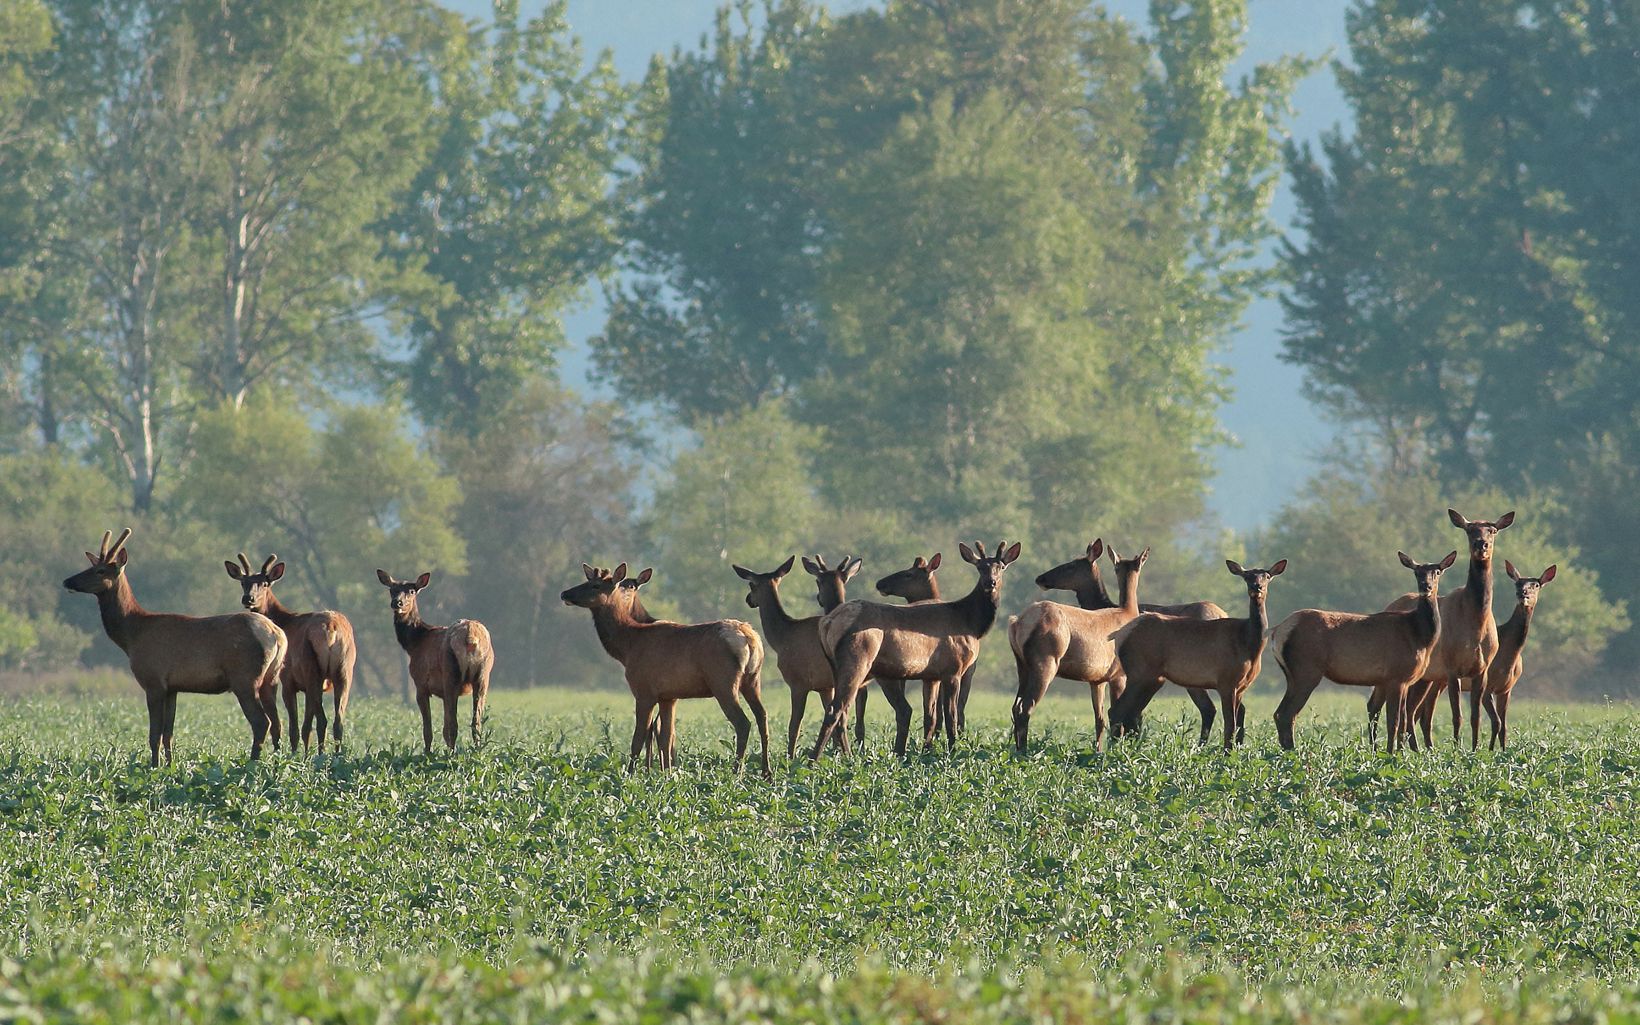 Elk herd at Ball Creek Elk herd gathered in a field at Ball Creek © Terry Roth